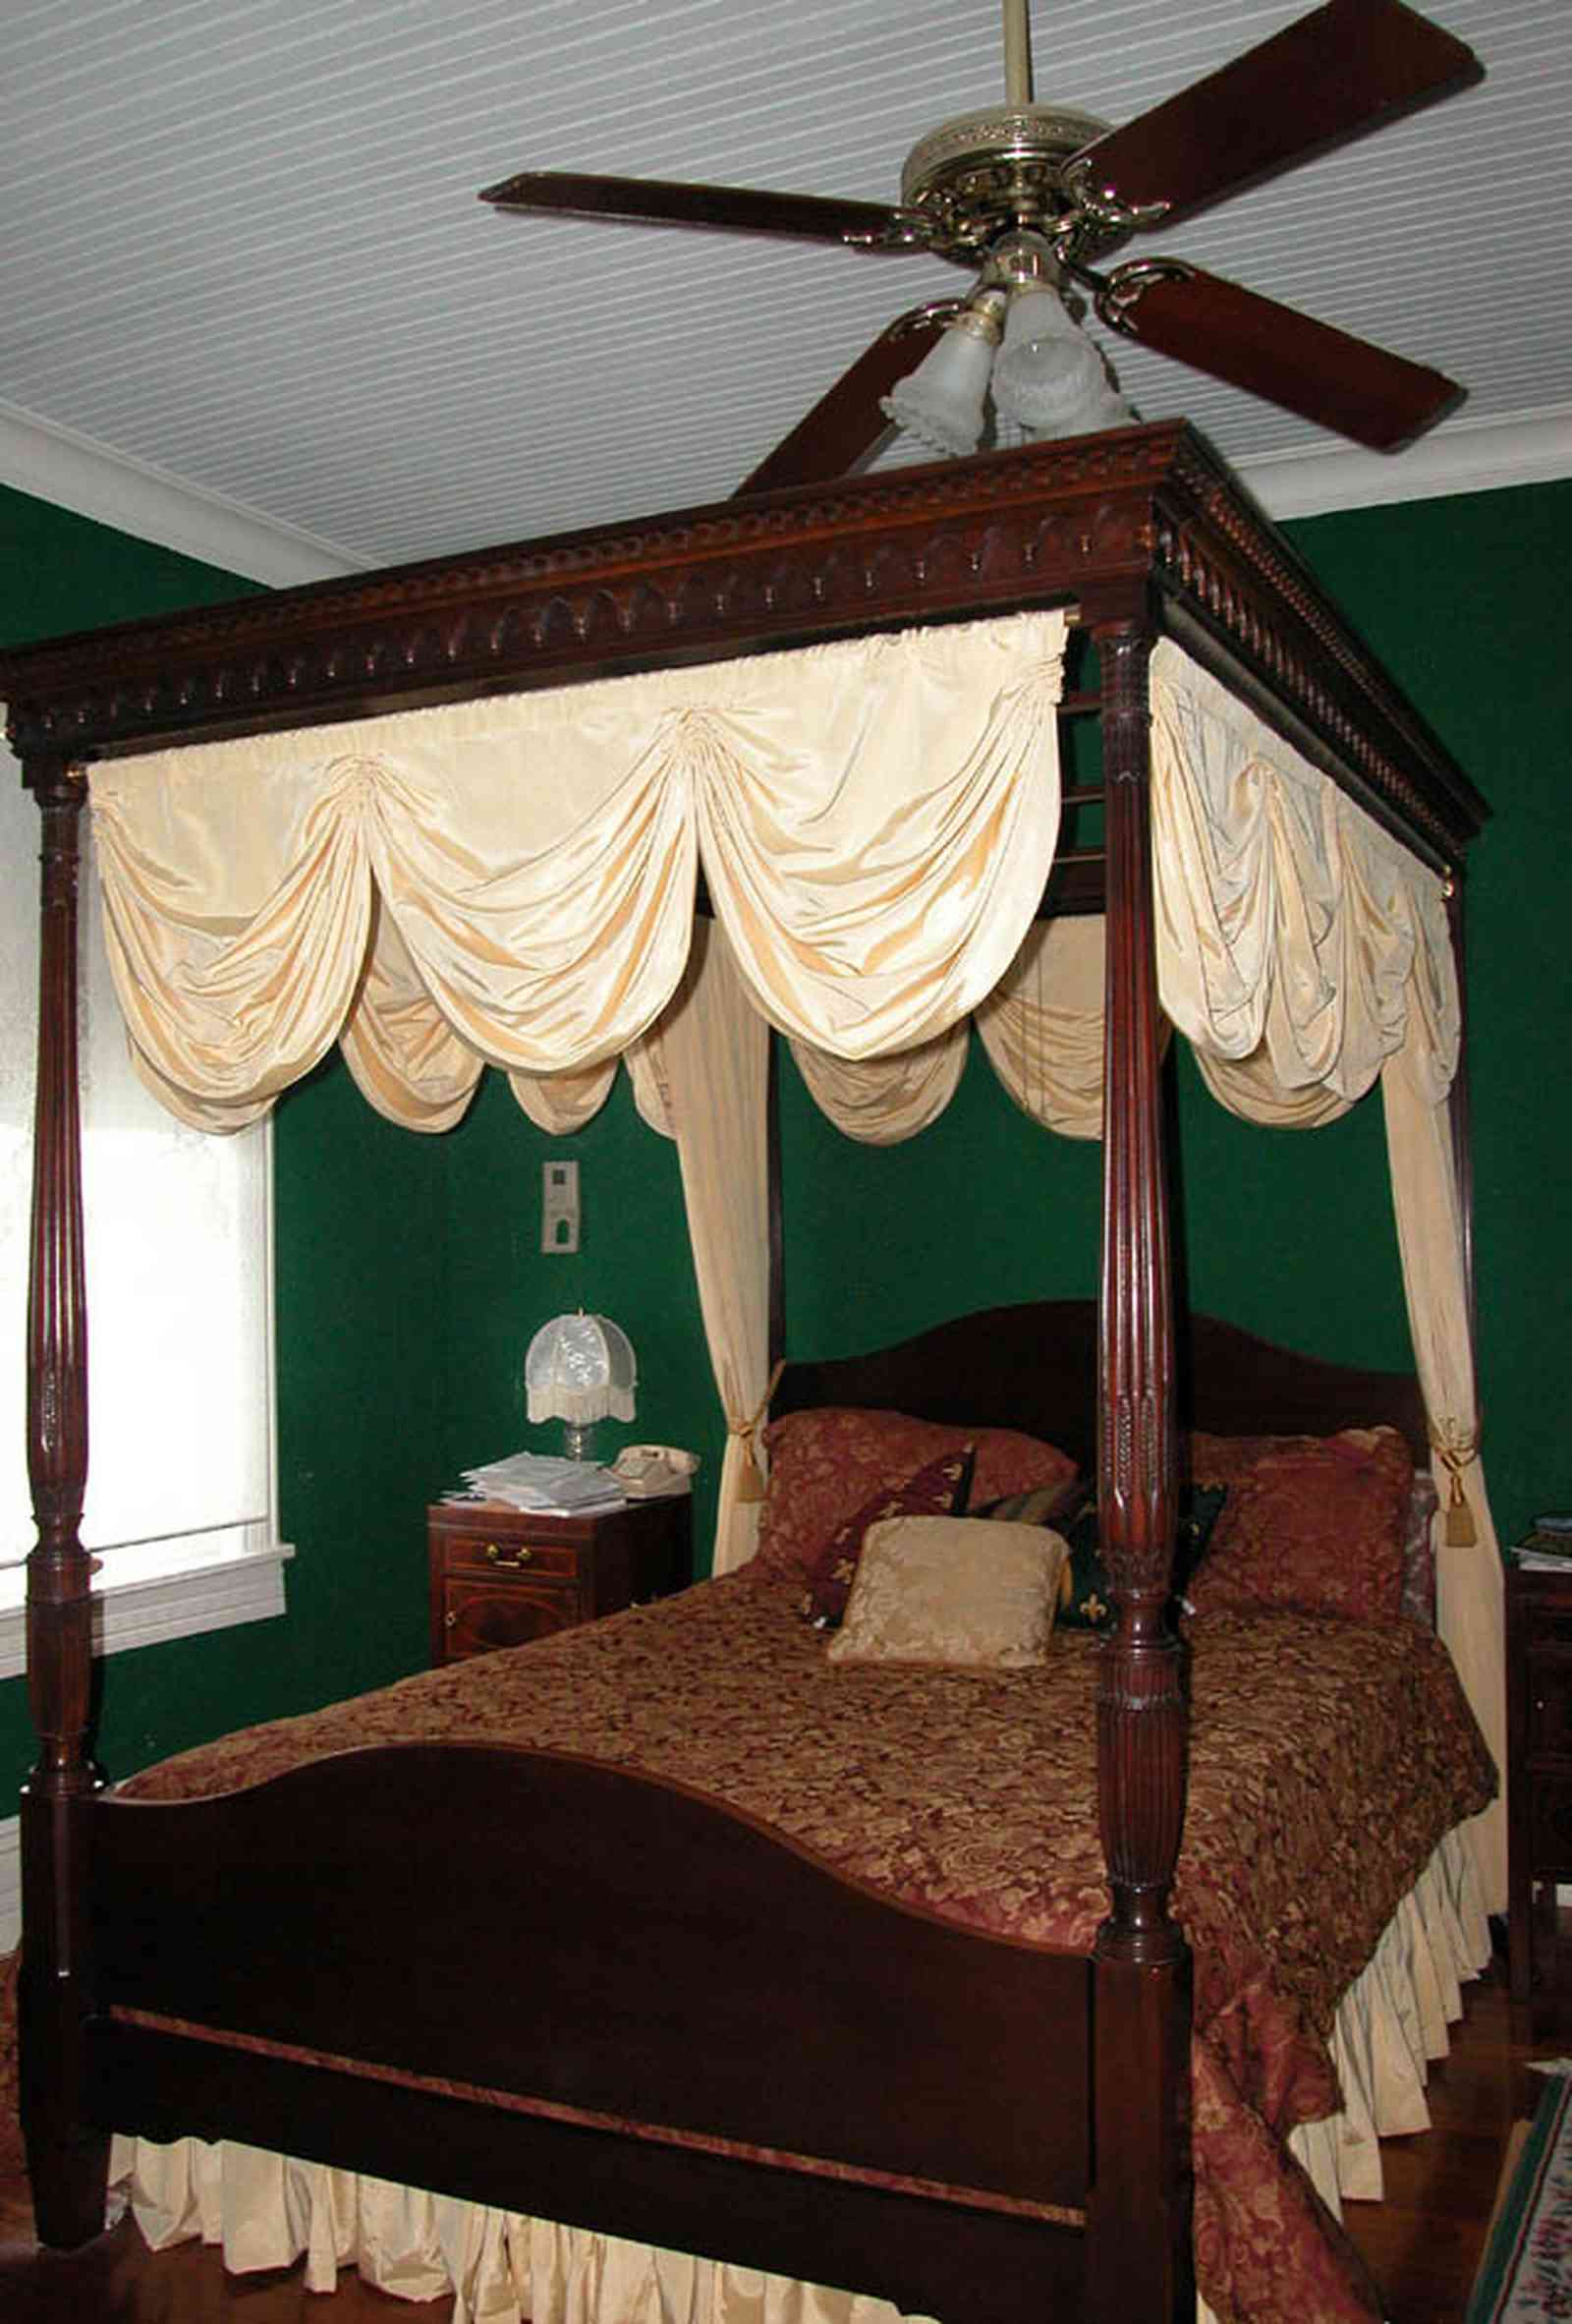 North-Hill:-52-West-Gonzalez-Street_19.jpg:  canopy bed, damask bedspread, four-poster bed, swag curtain, ceiling fan